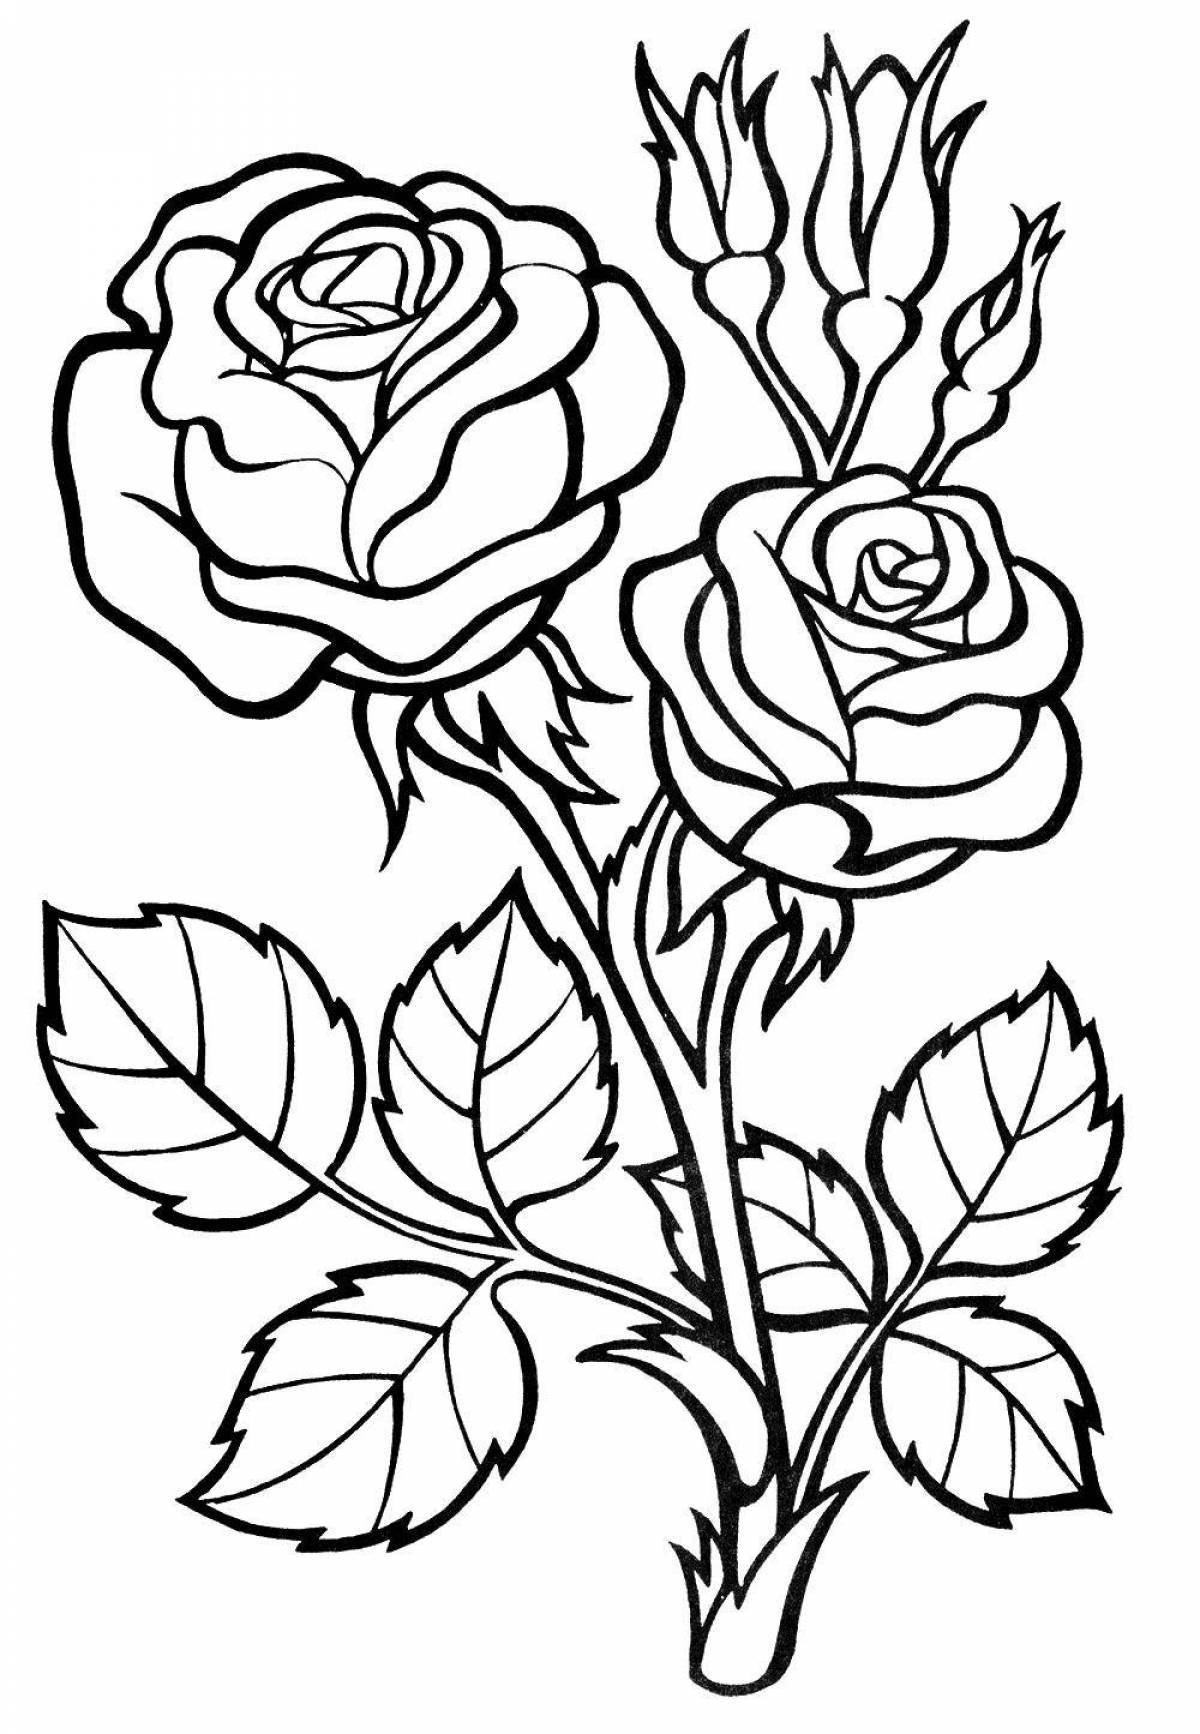 Coloring bright rose